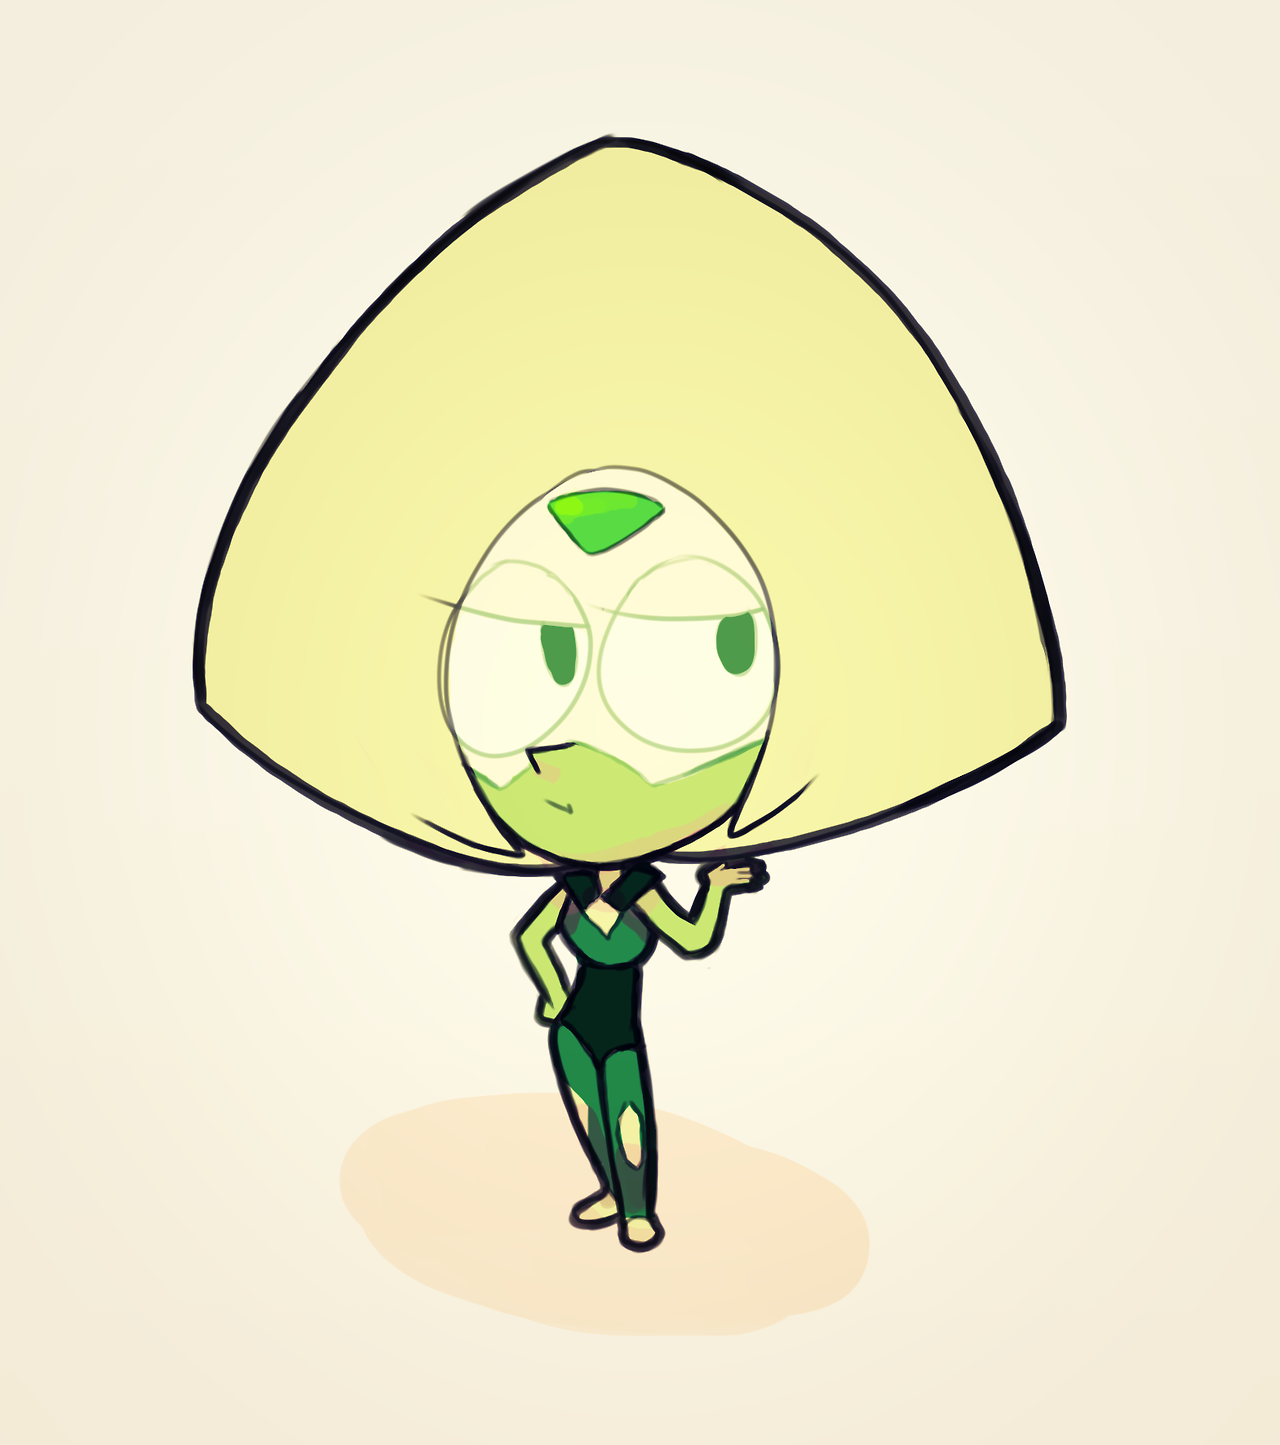 Lol I tried to draw Peridot as small as I could while keeping her cute.